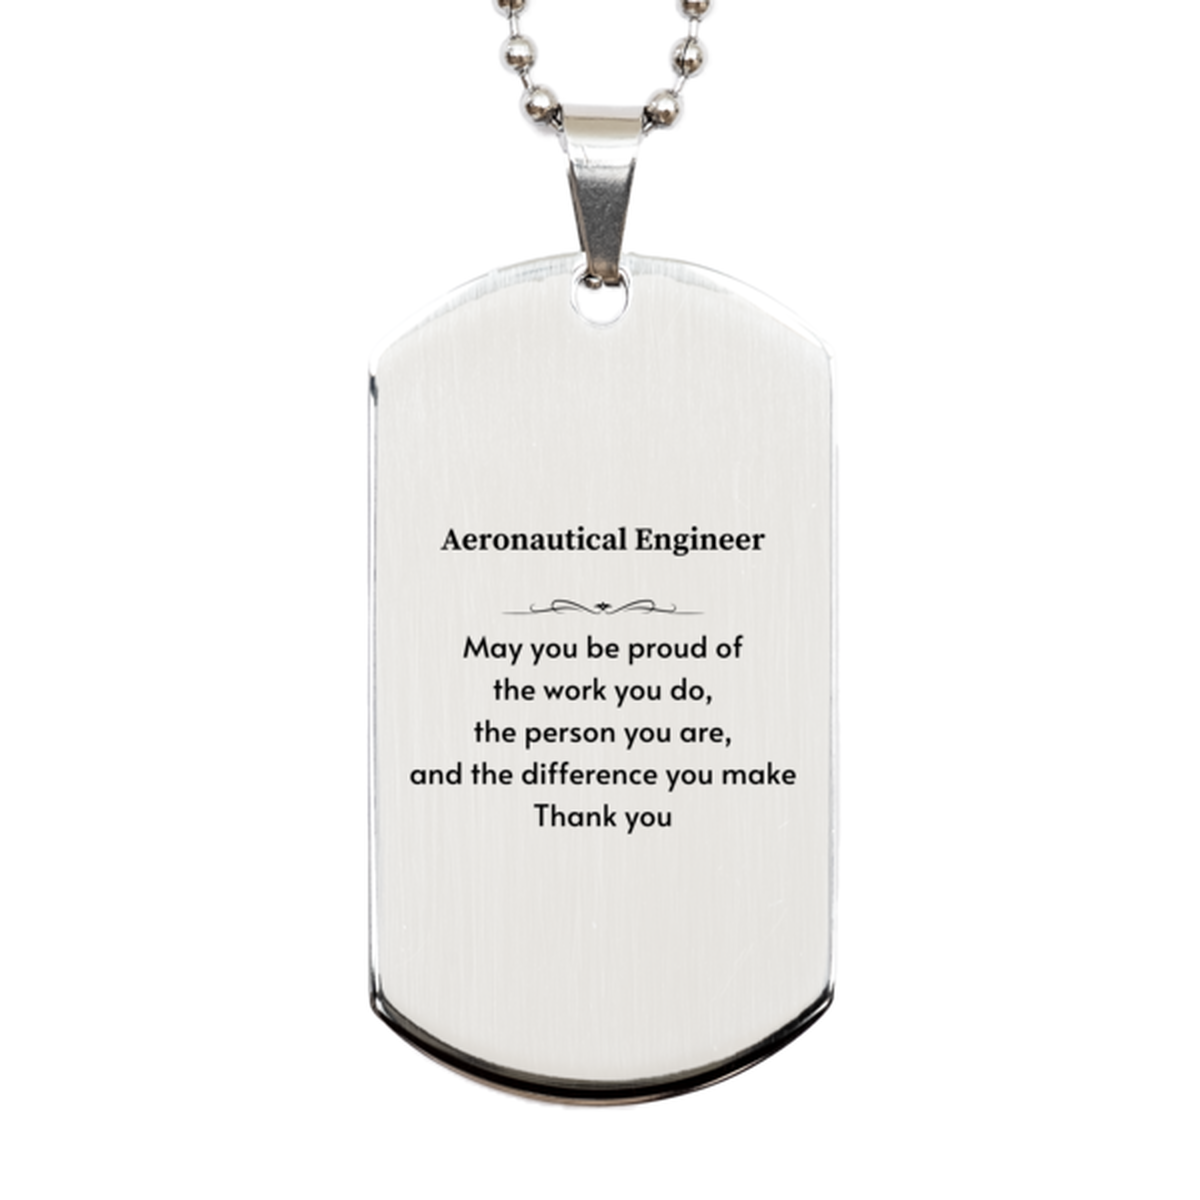 Heartwarming Silver Dog Tag Retirement Coworkers Gifts for Aeronautical Engineer, Aeronautical Engineer May You be proud of the work you do, the person you are Gifts for Boss Men Women Friends